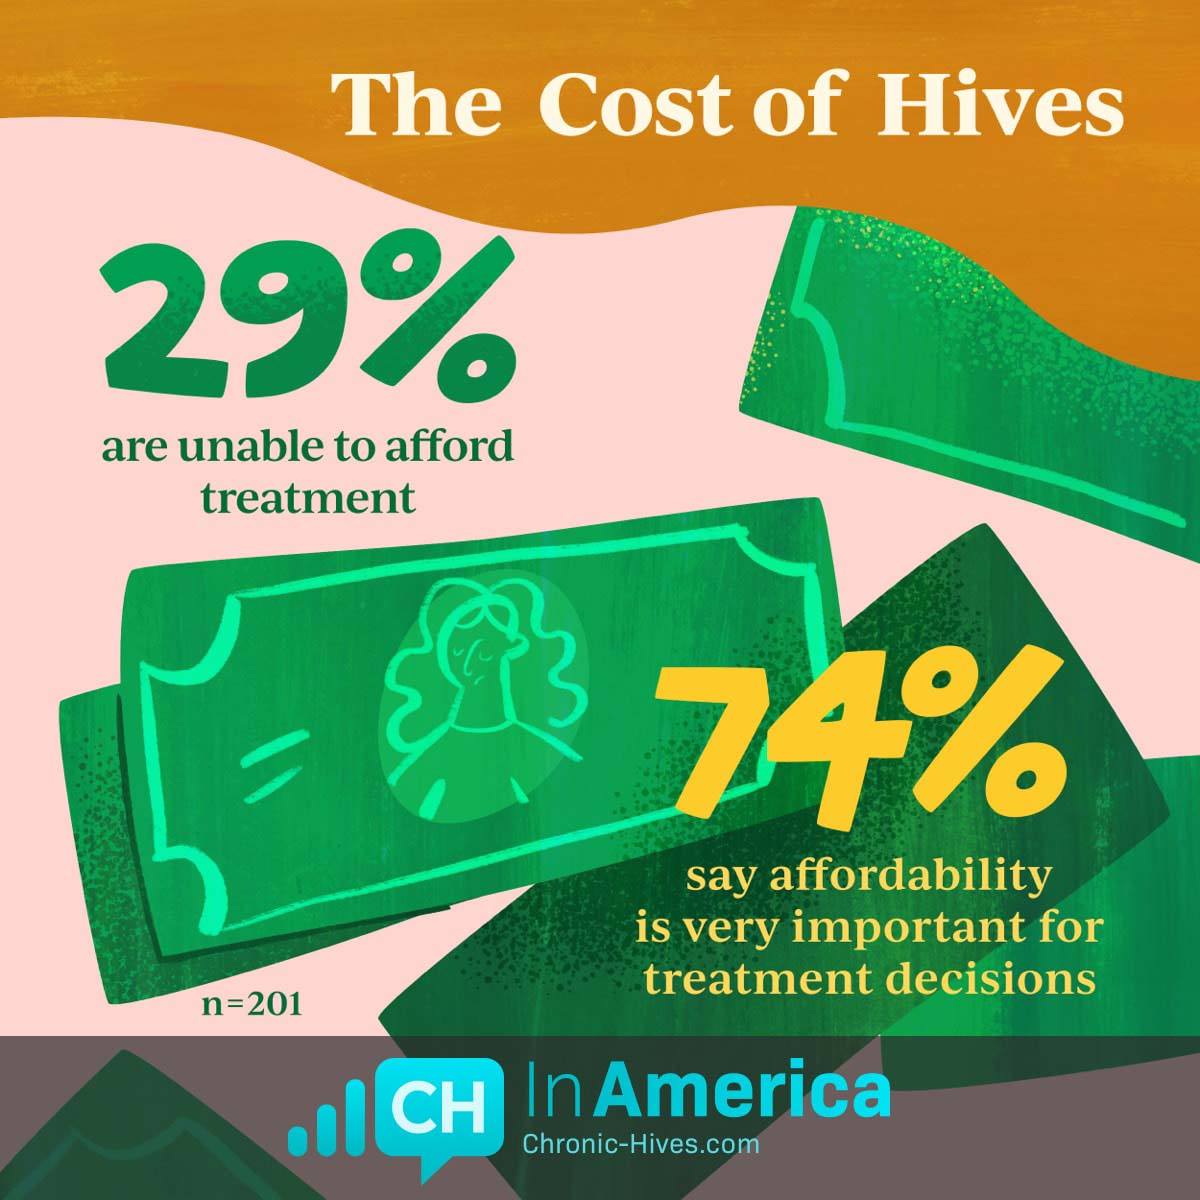 The Cost of Hives. 39% are unable to afford treatment, and 74% say affordability is very important for treatment decisions.